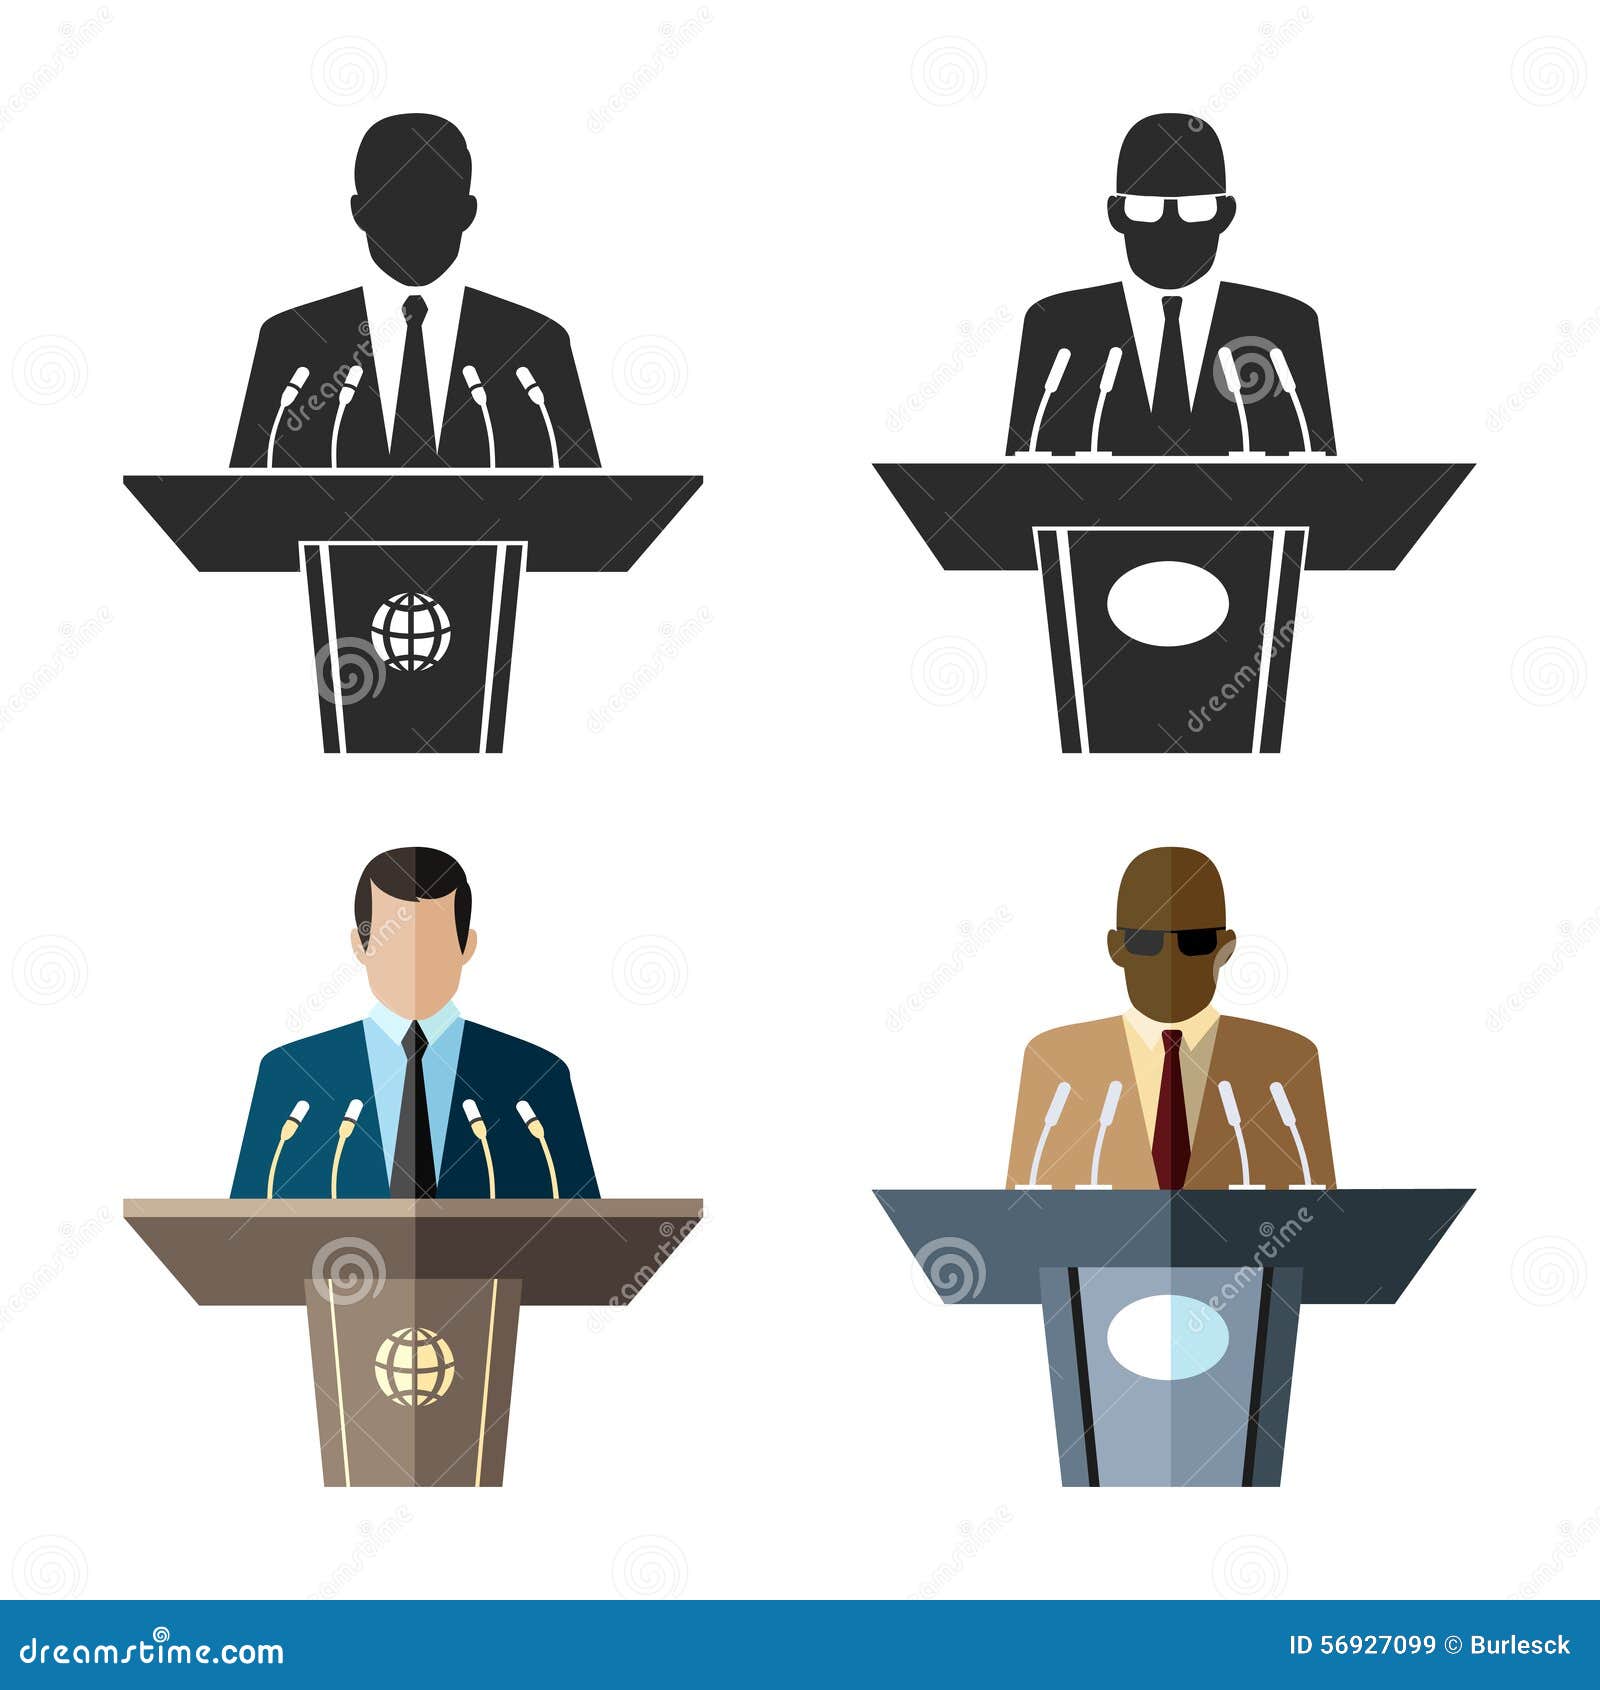 speaker or orator icon in black and flat style